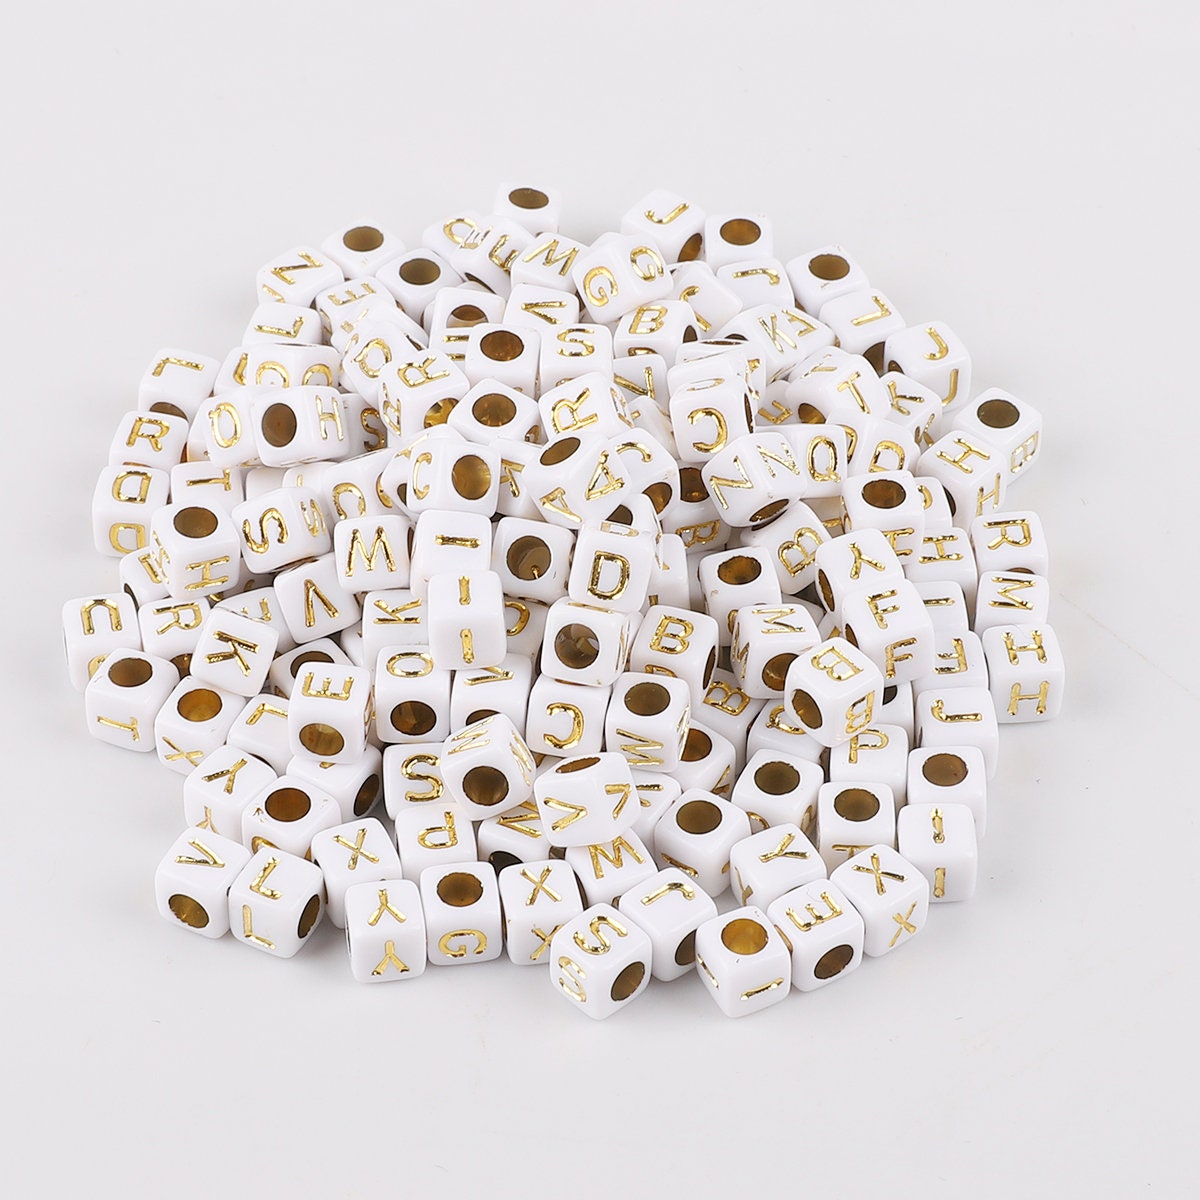 Letter Beads For Threading Approx. 1000 Pieces Colourful Letter Beads  Square Craft Beads Letters A-z Beads For Jewellery Crafts